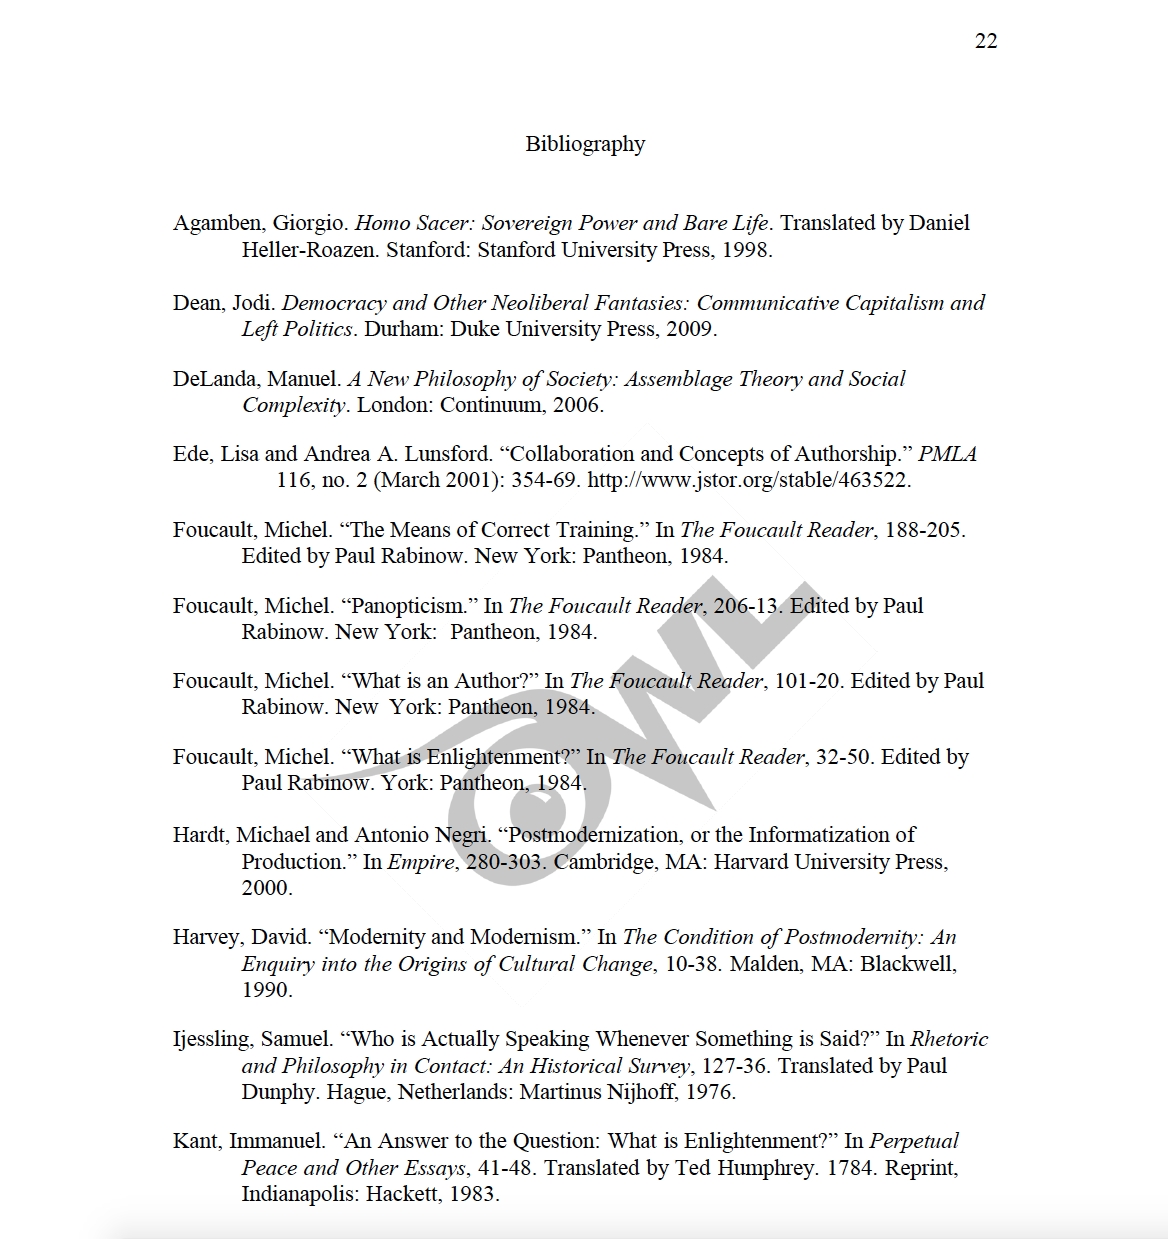 This image shows the bibliography page of a CMS paper.